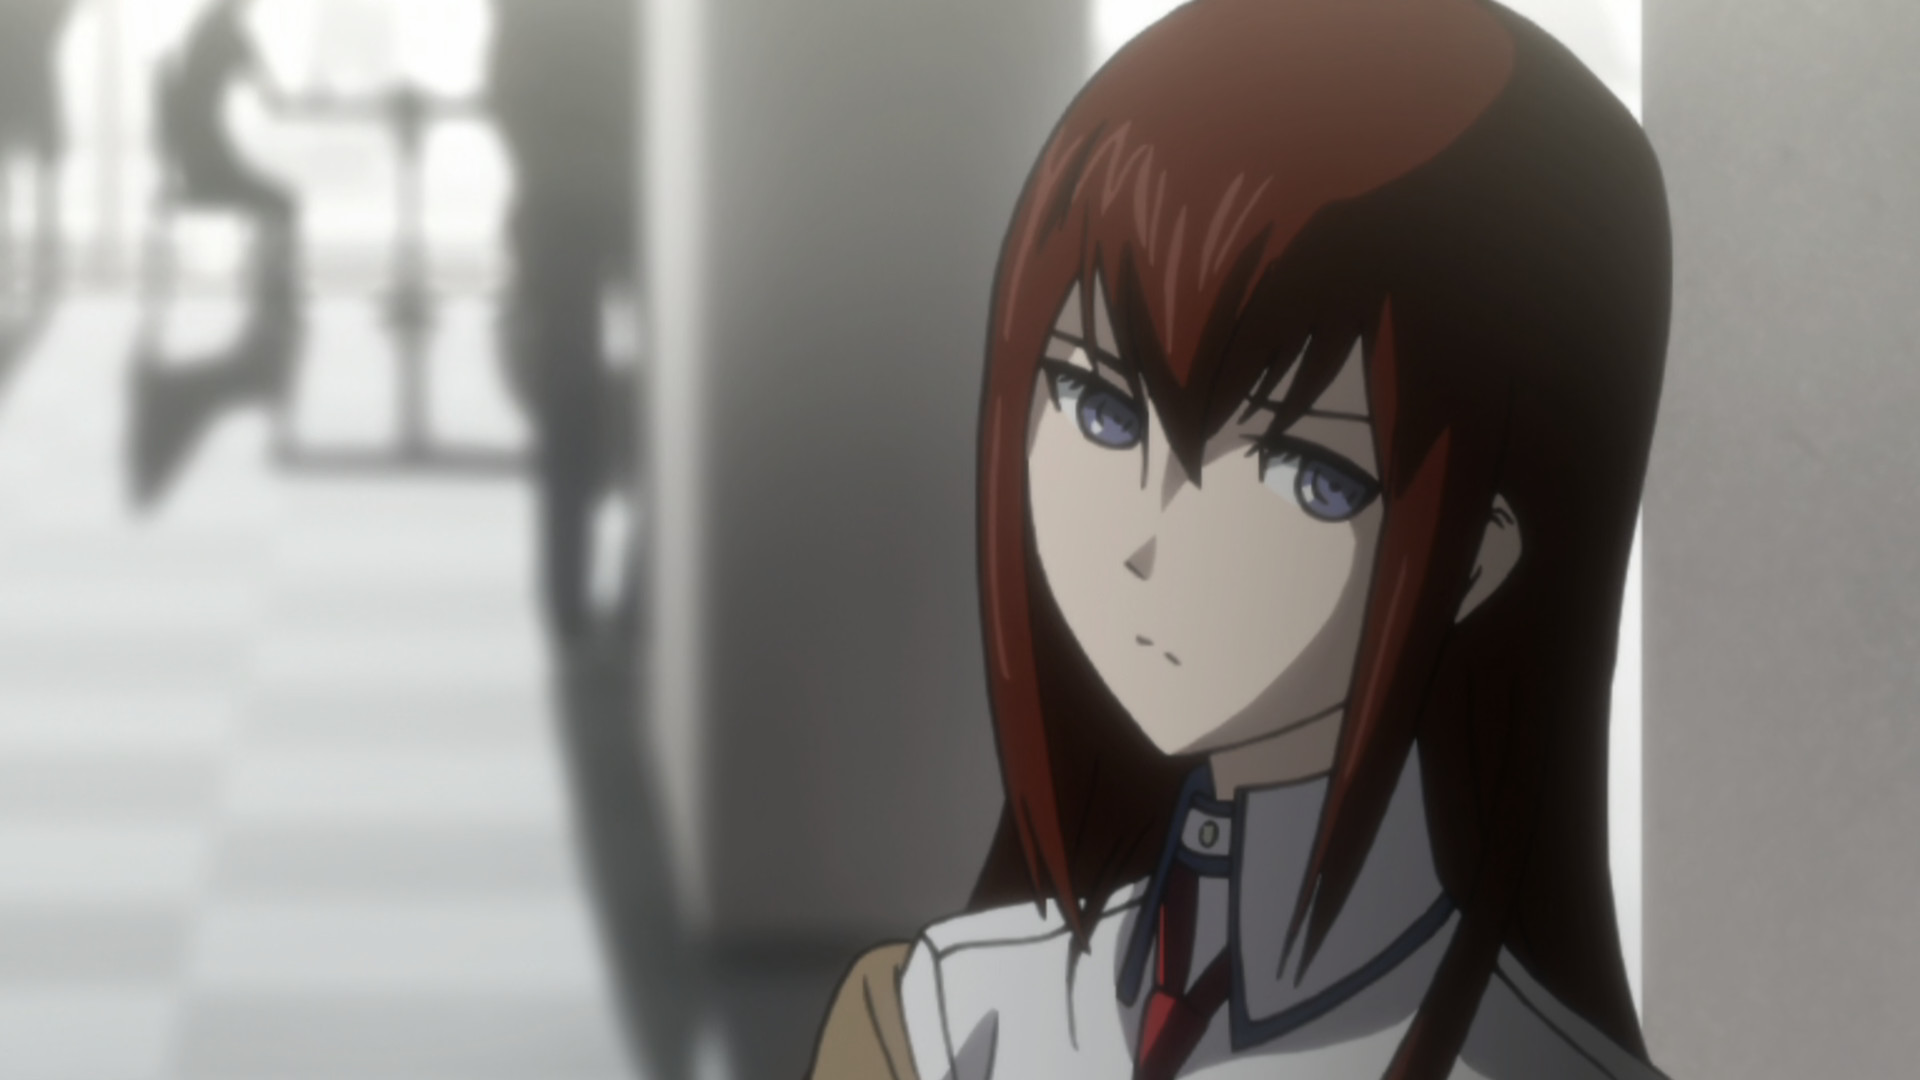 Steins;Gate: 10 Best Characters, Ranked